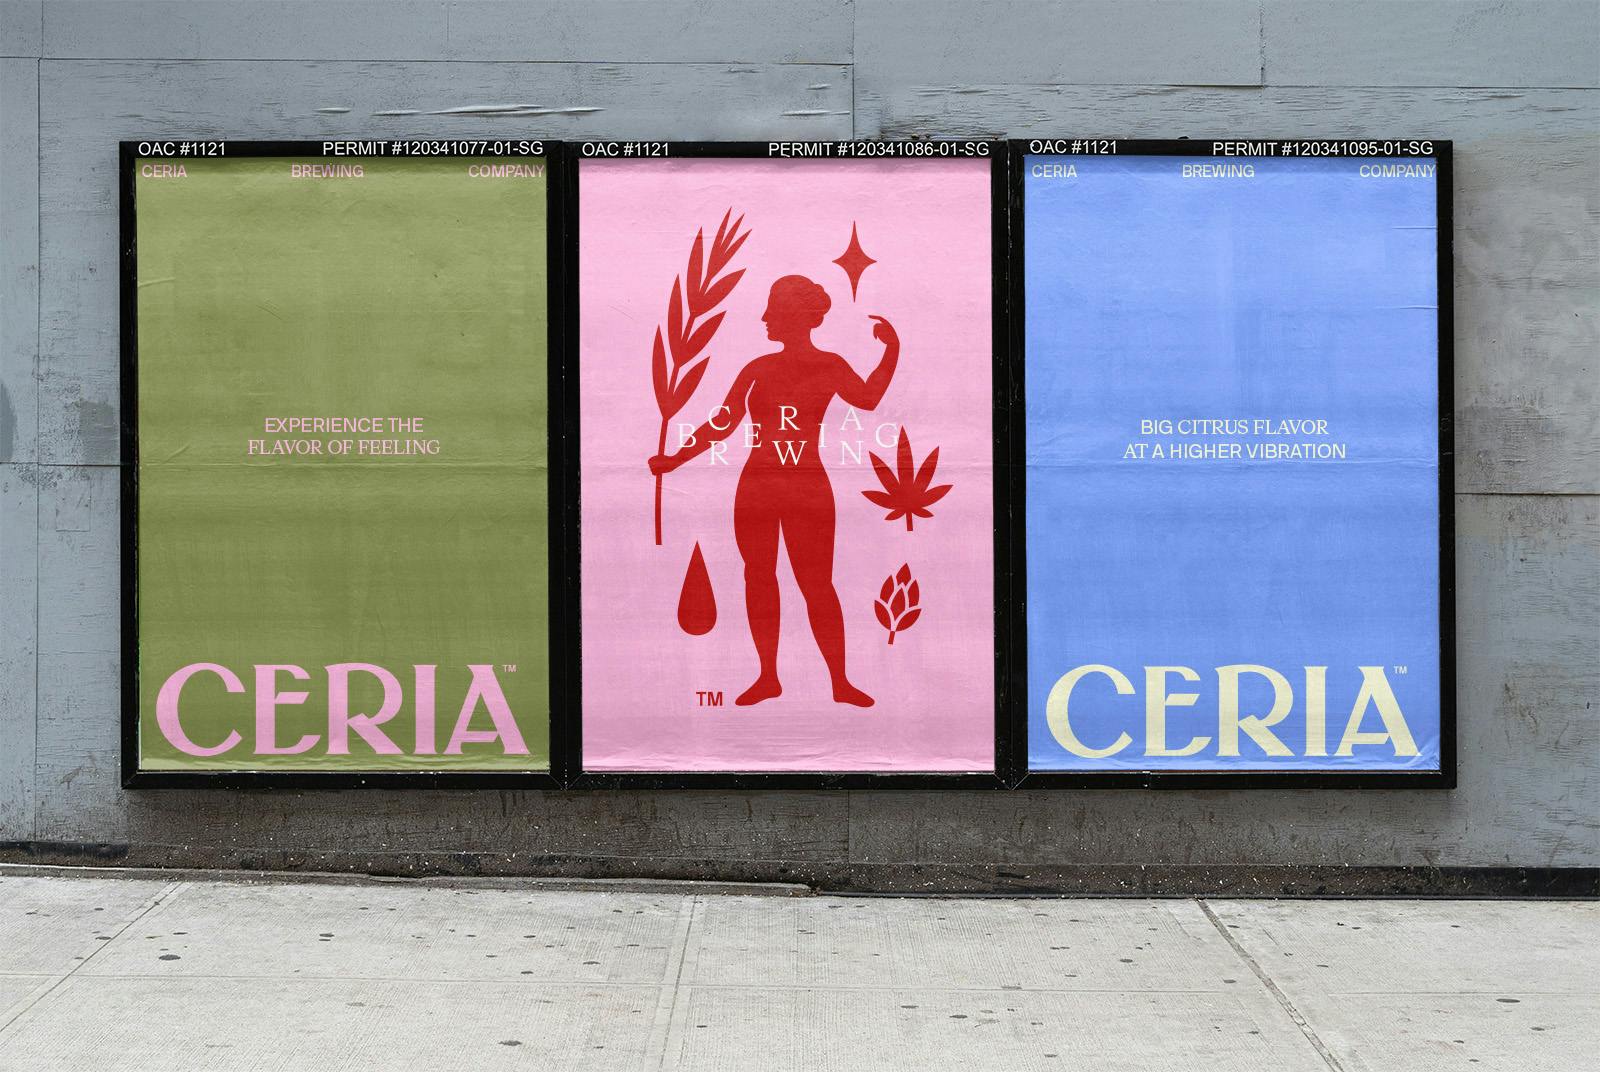 Ceria posters by Mother Design